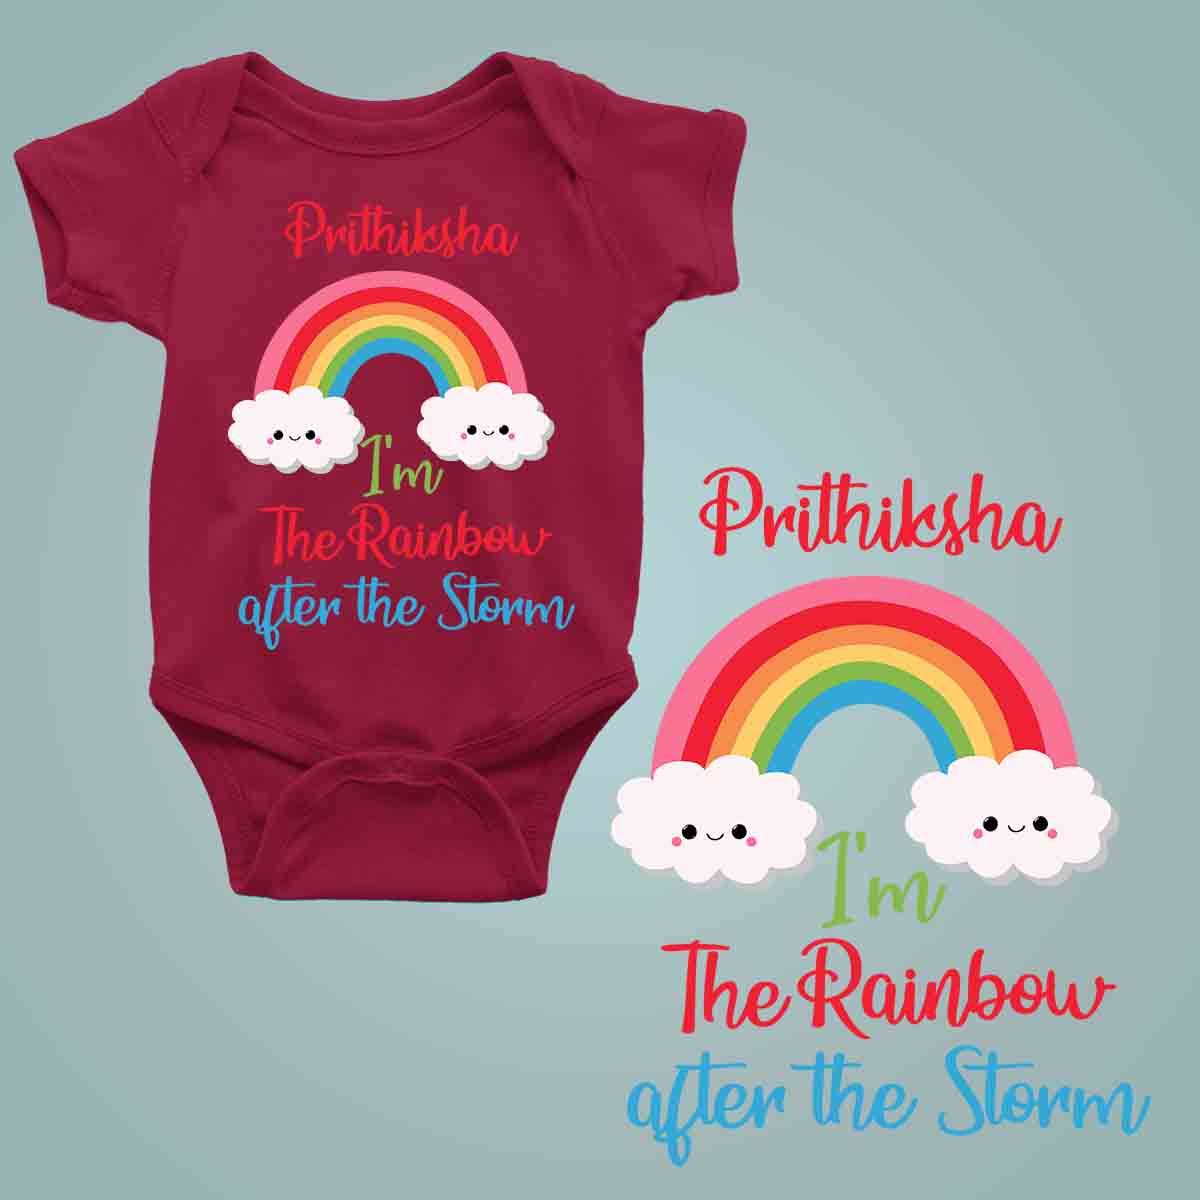 I'm the Rainbow after the storm bg maroon